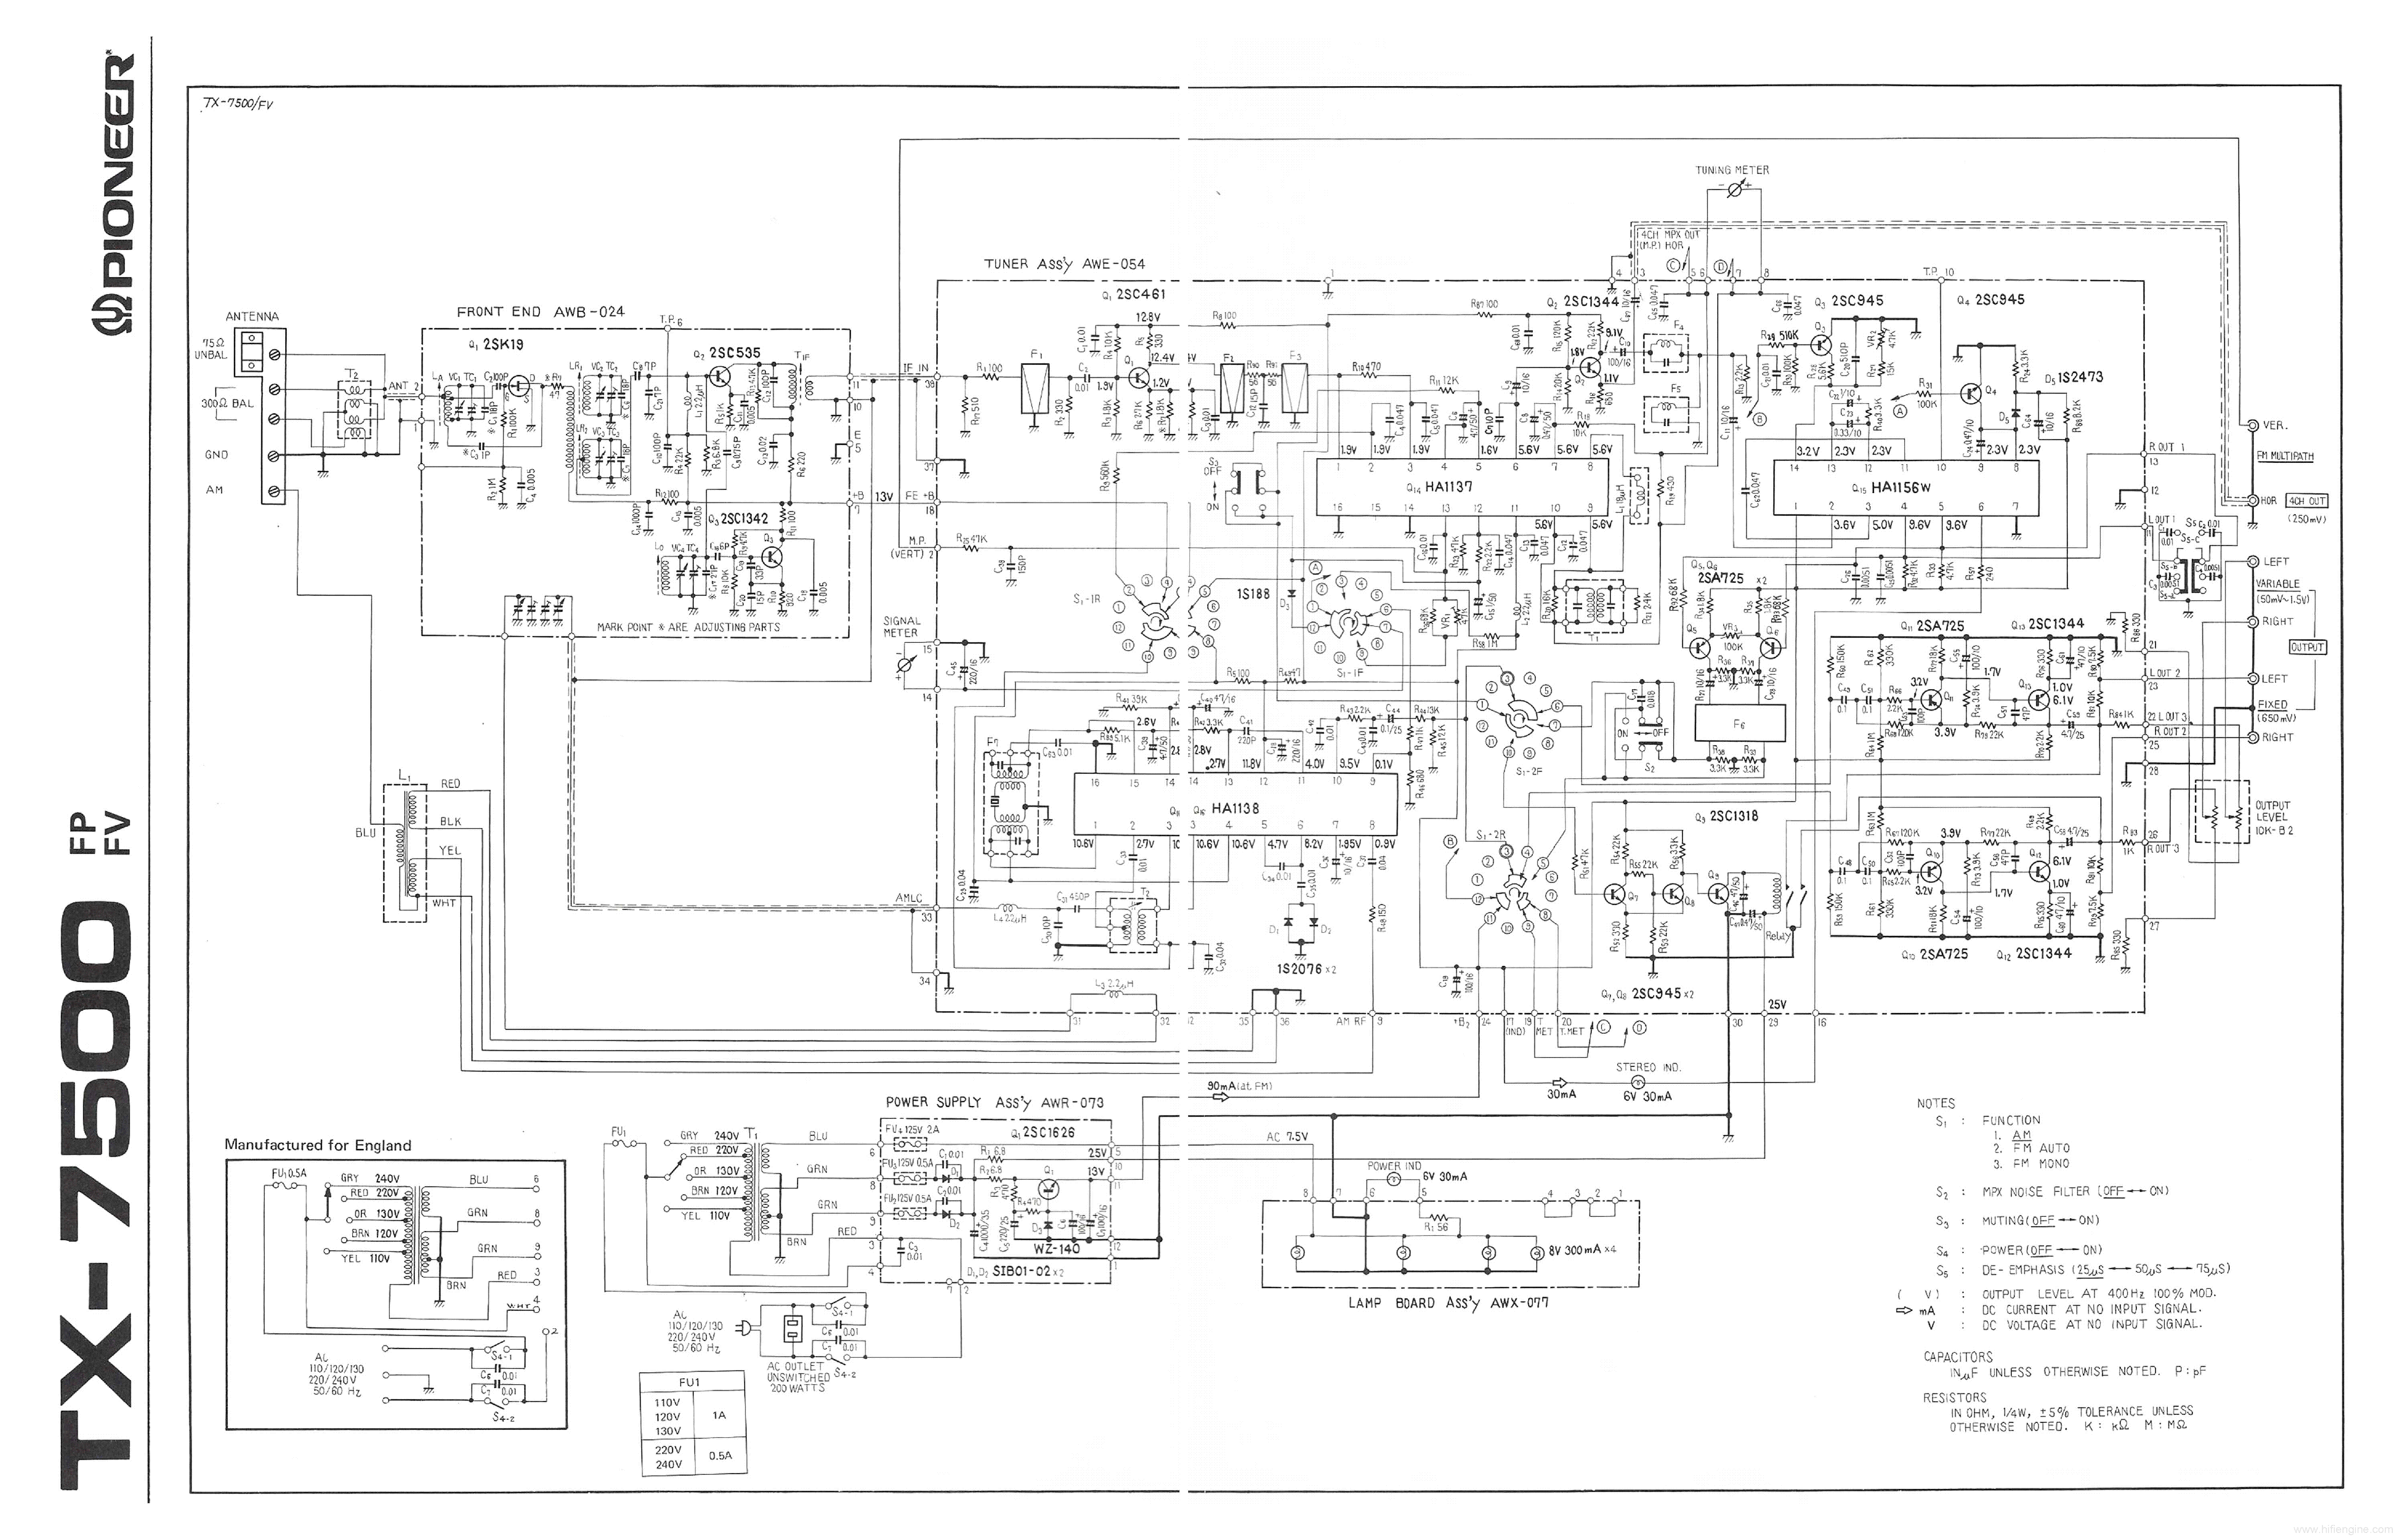 PIONEER TX-7500 SCH service manual (1st page)